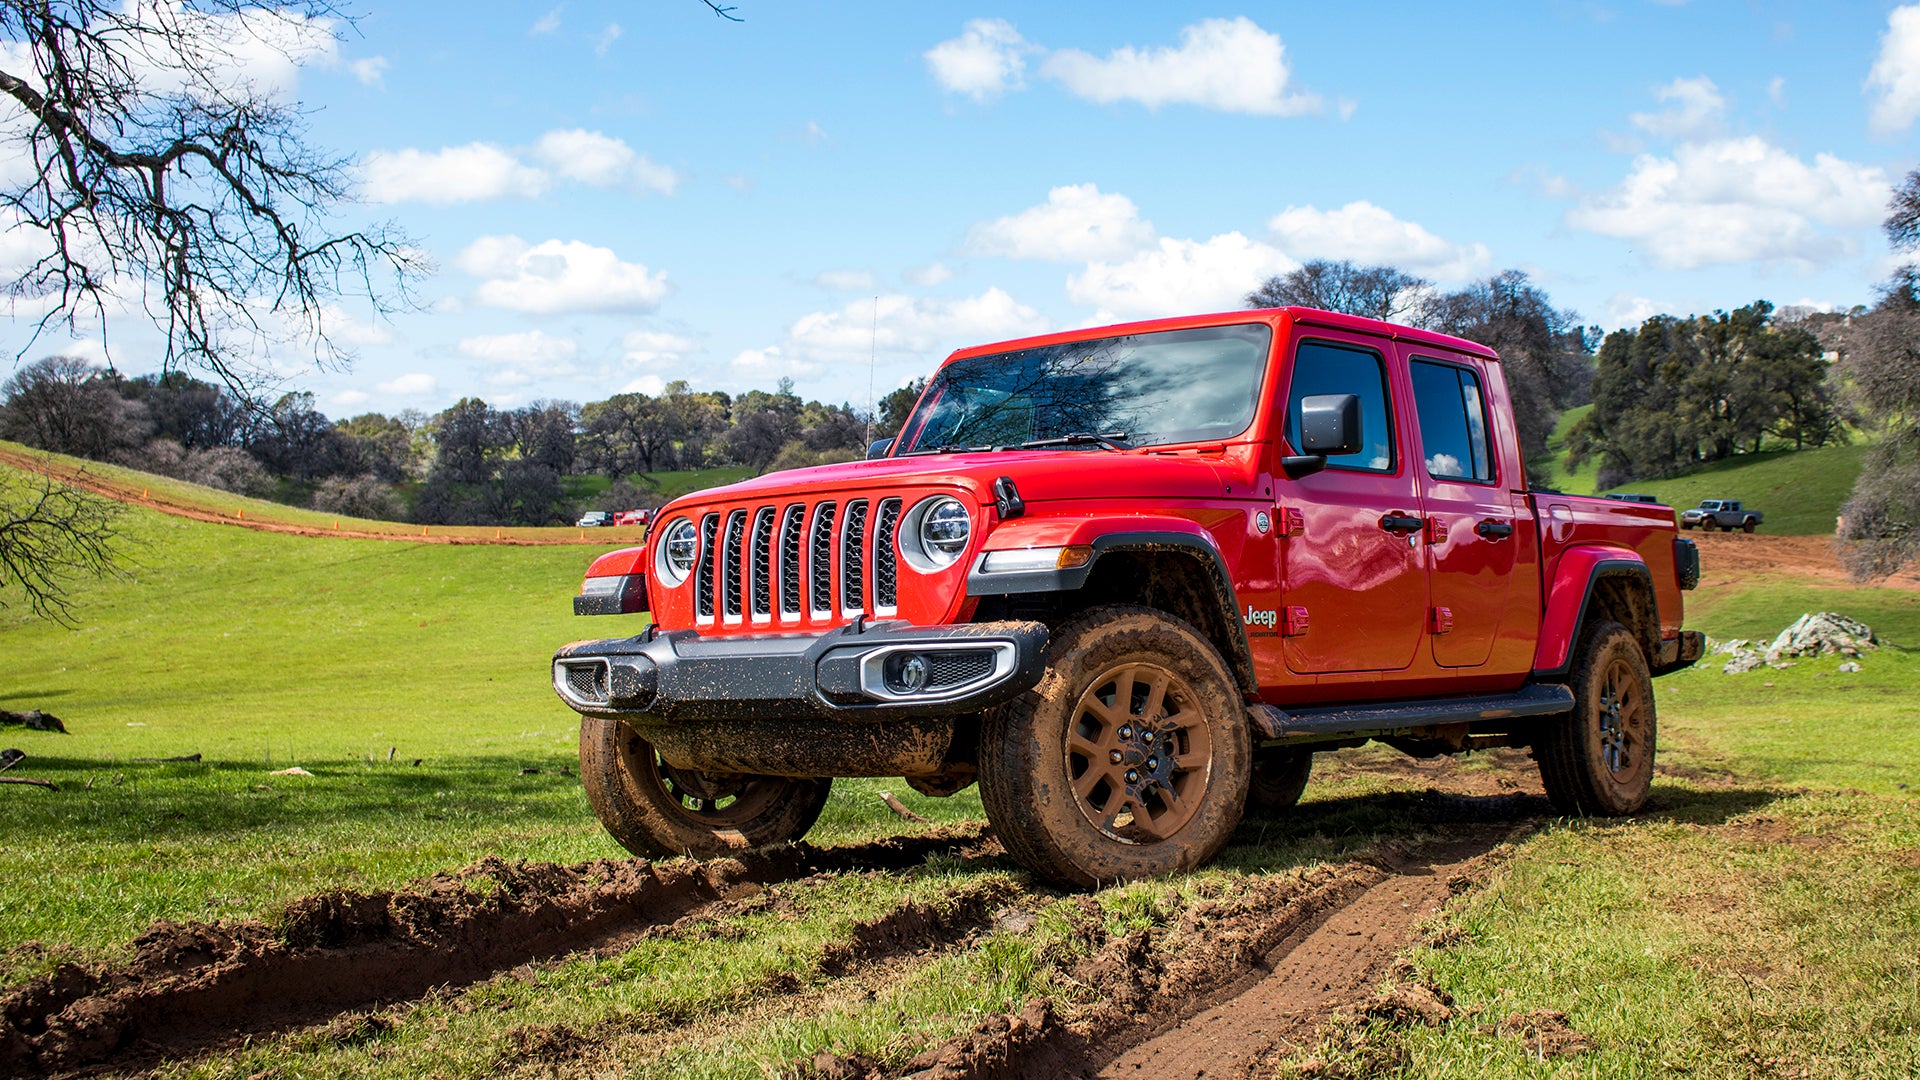 2020 Jeep Gladiator Review: Master of the Midsize Pickup Truck Arena